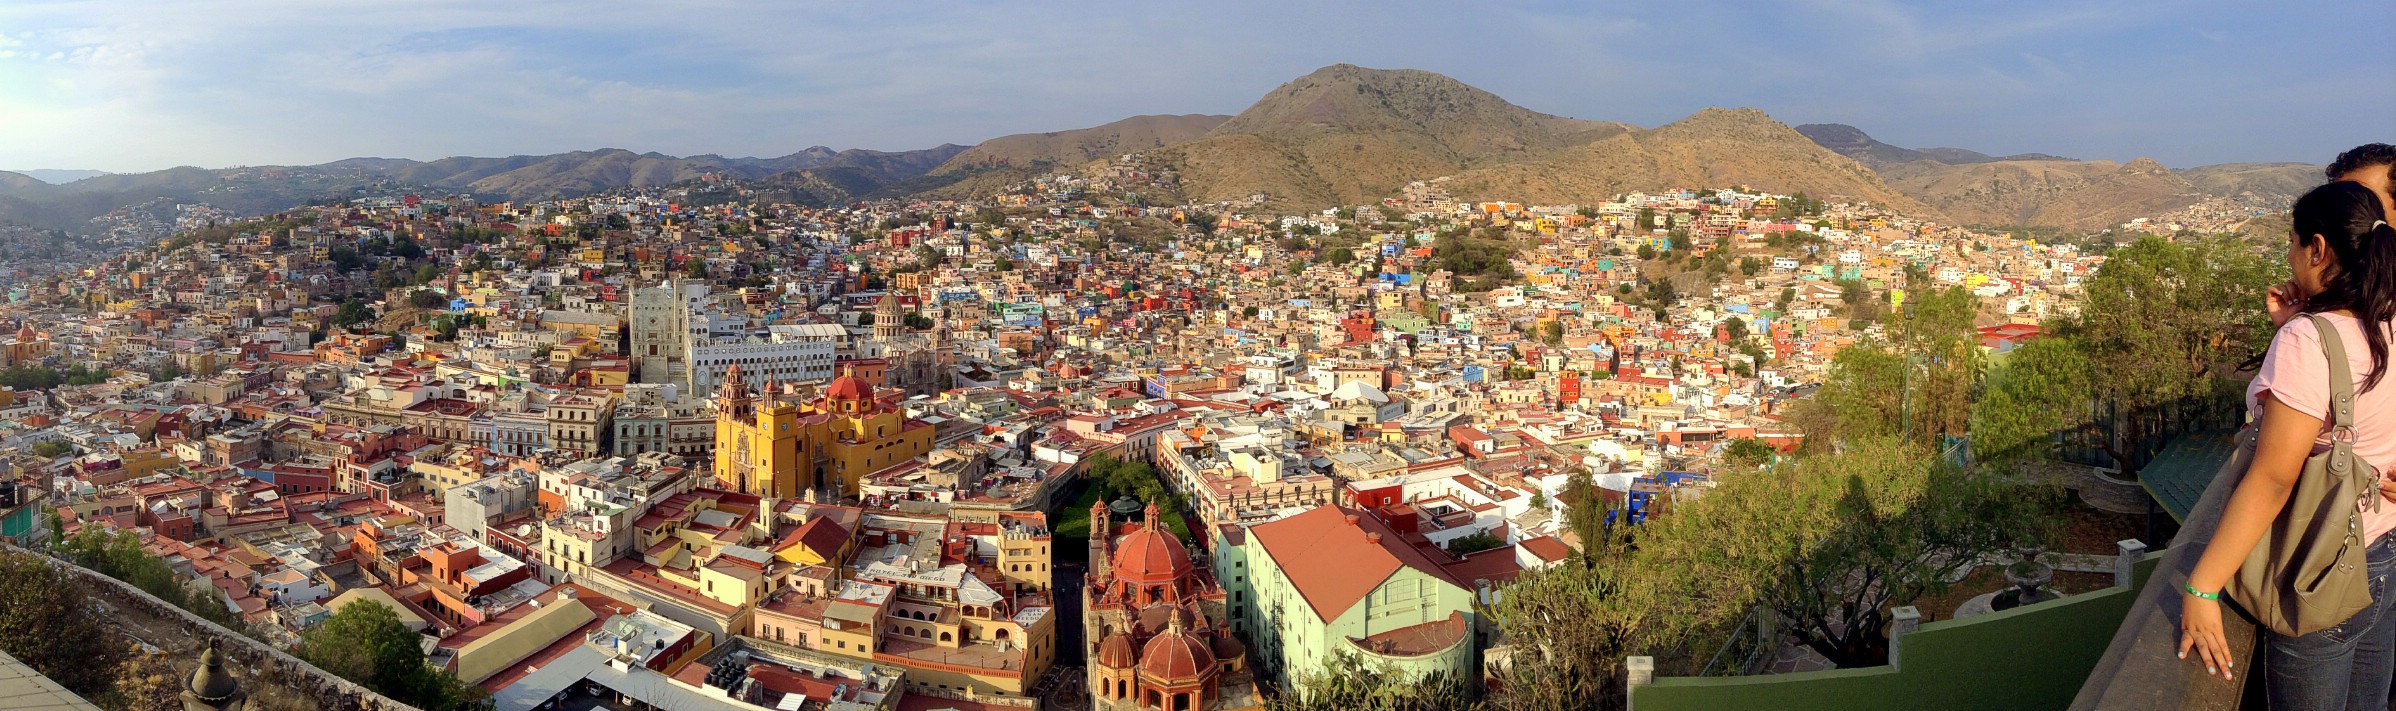 An iPod panorama overlooking Guanajuato as seen from Panoromica, Guanajuato, Mexico. April 23rd 2013 (iPod) *As with all images, click on the image to expand to full screen.* 